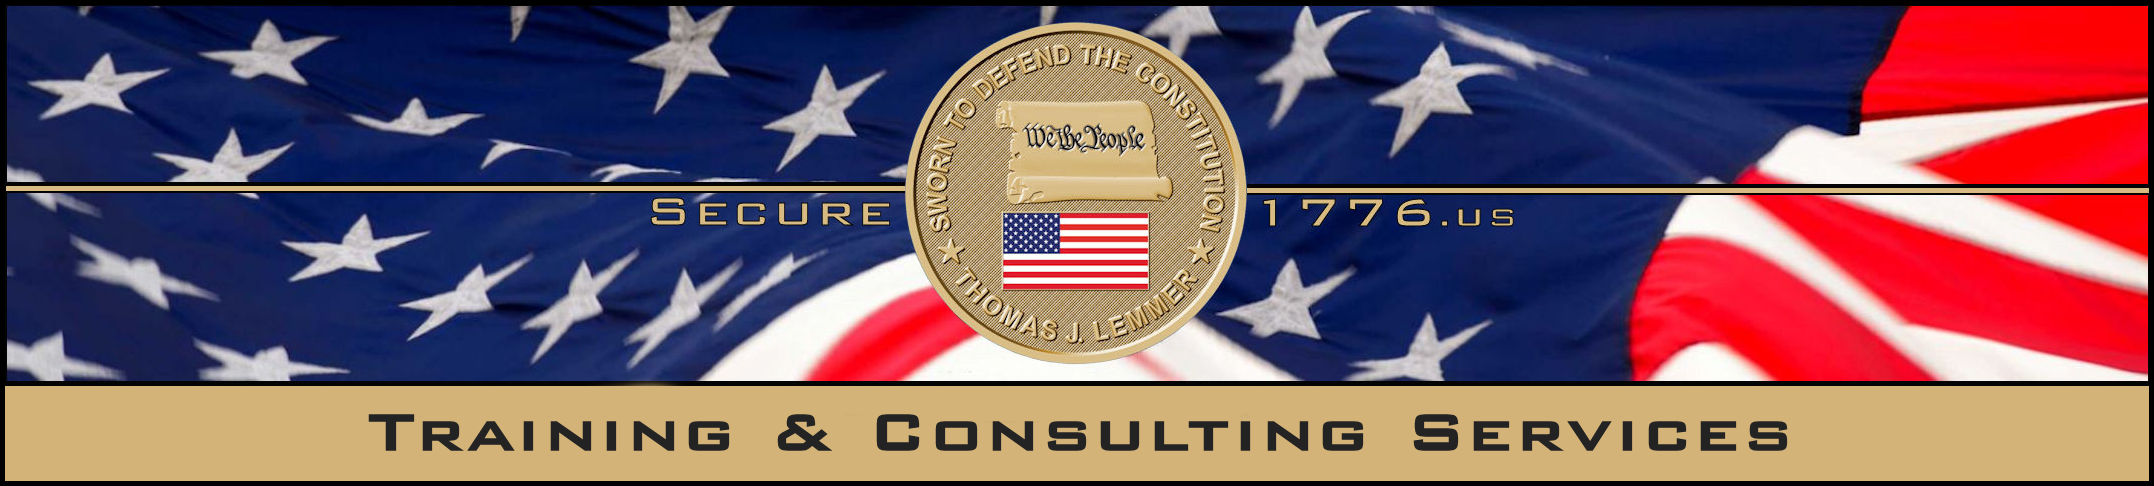 Training & Consulting Services